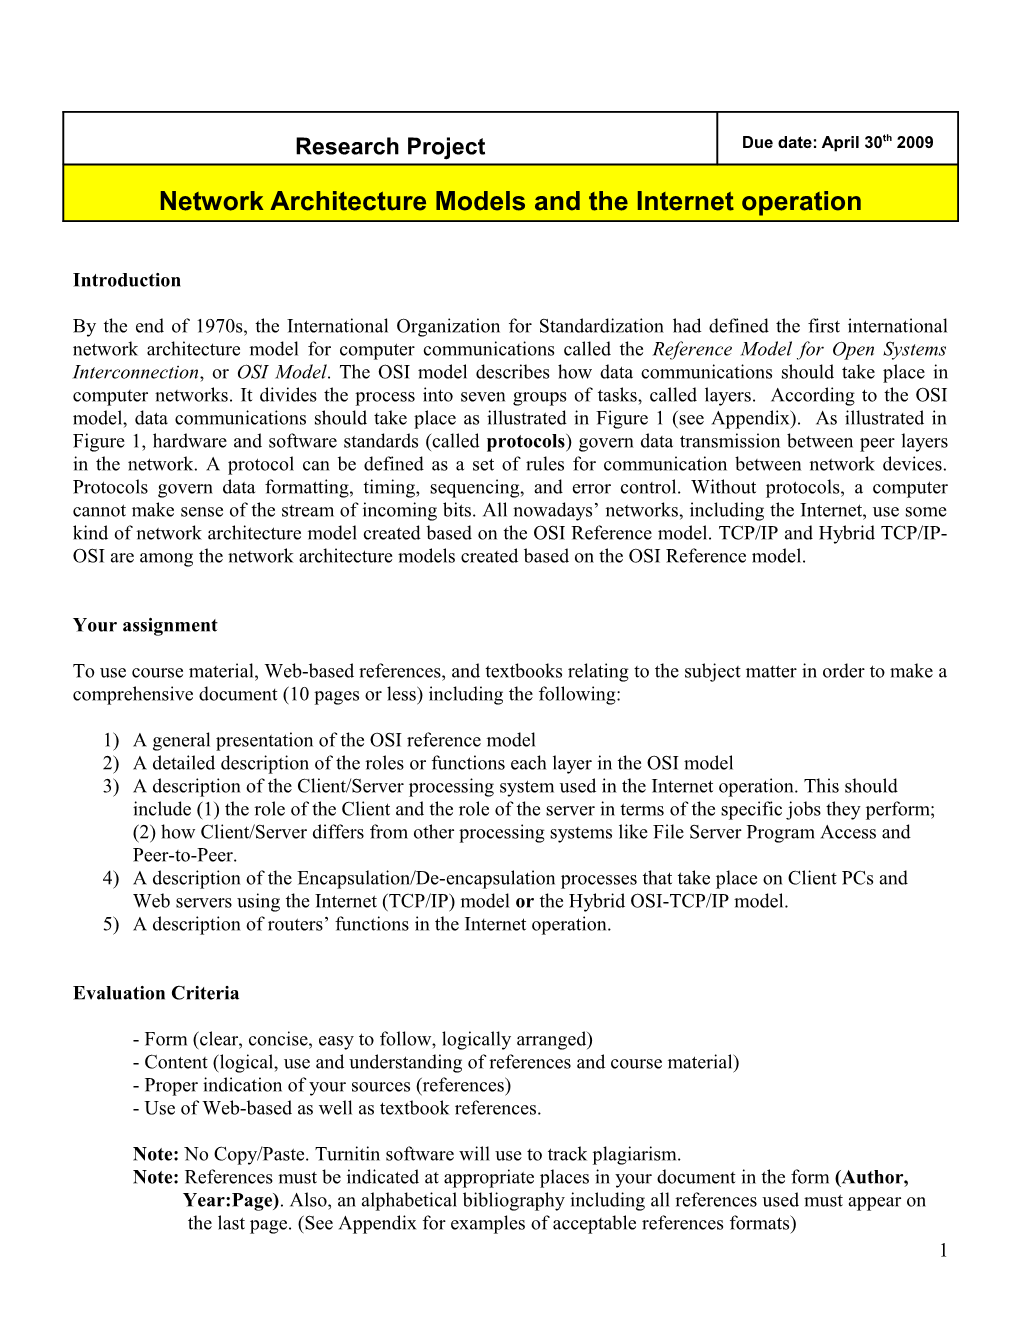 Network Architecture Models and the Internet Operation